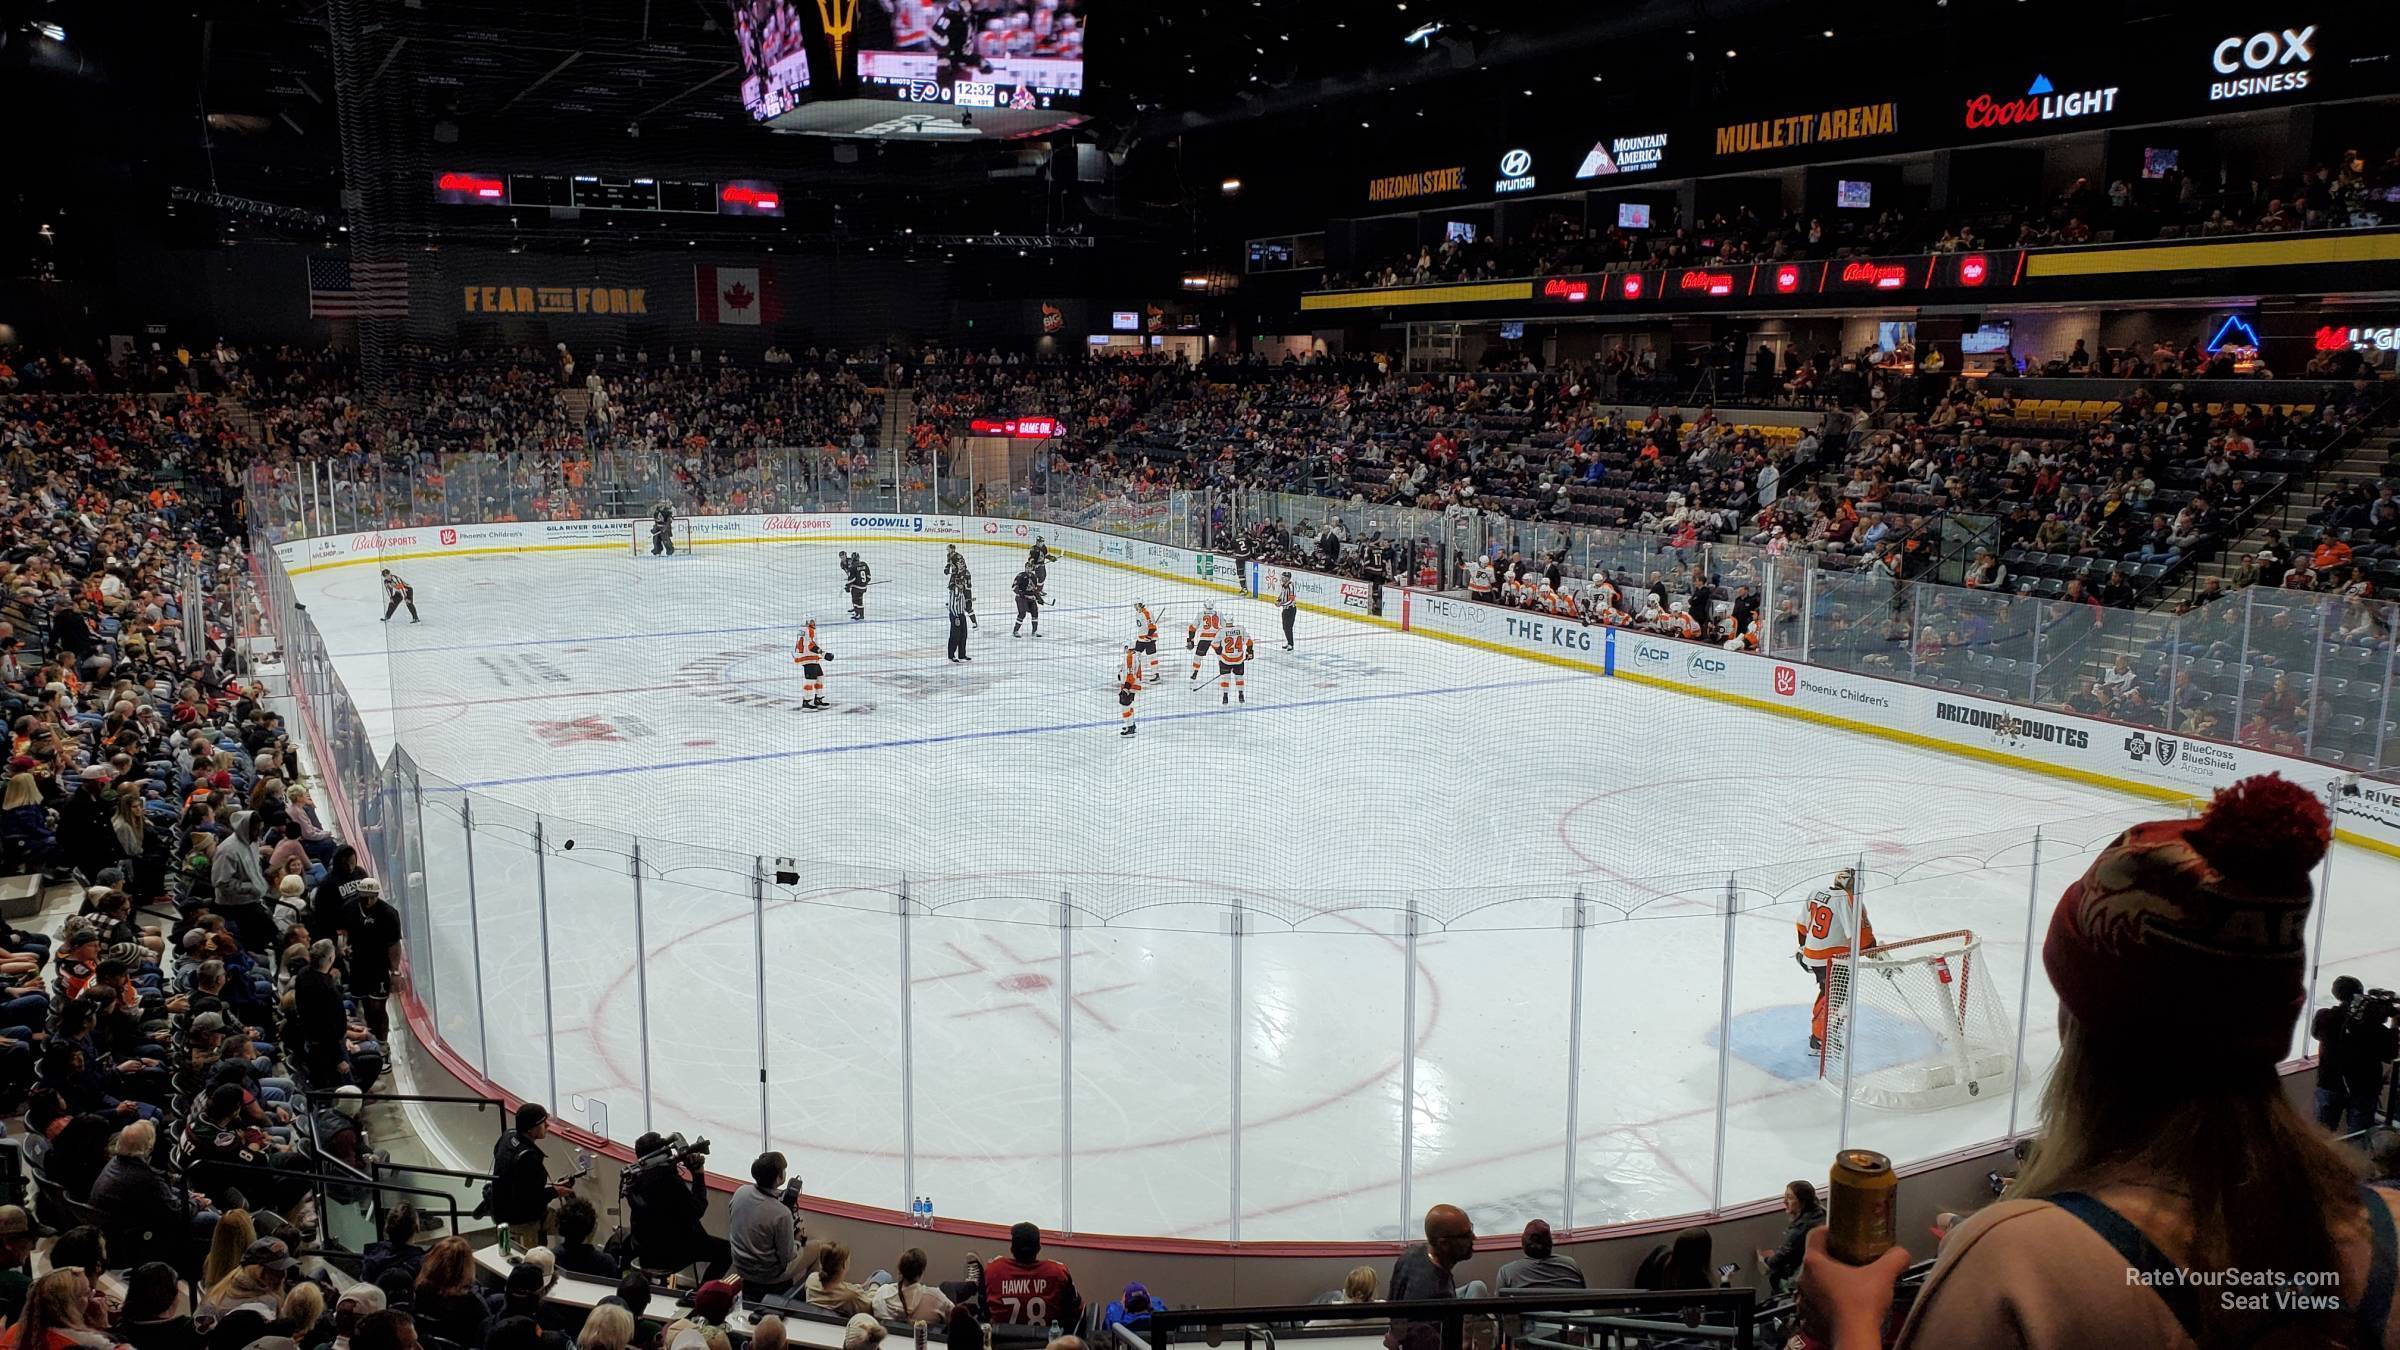 section 108, row sro seat view  - mullett arena